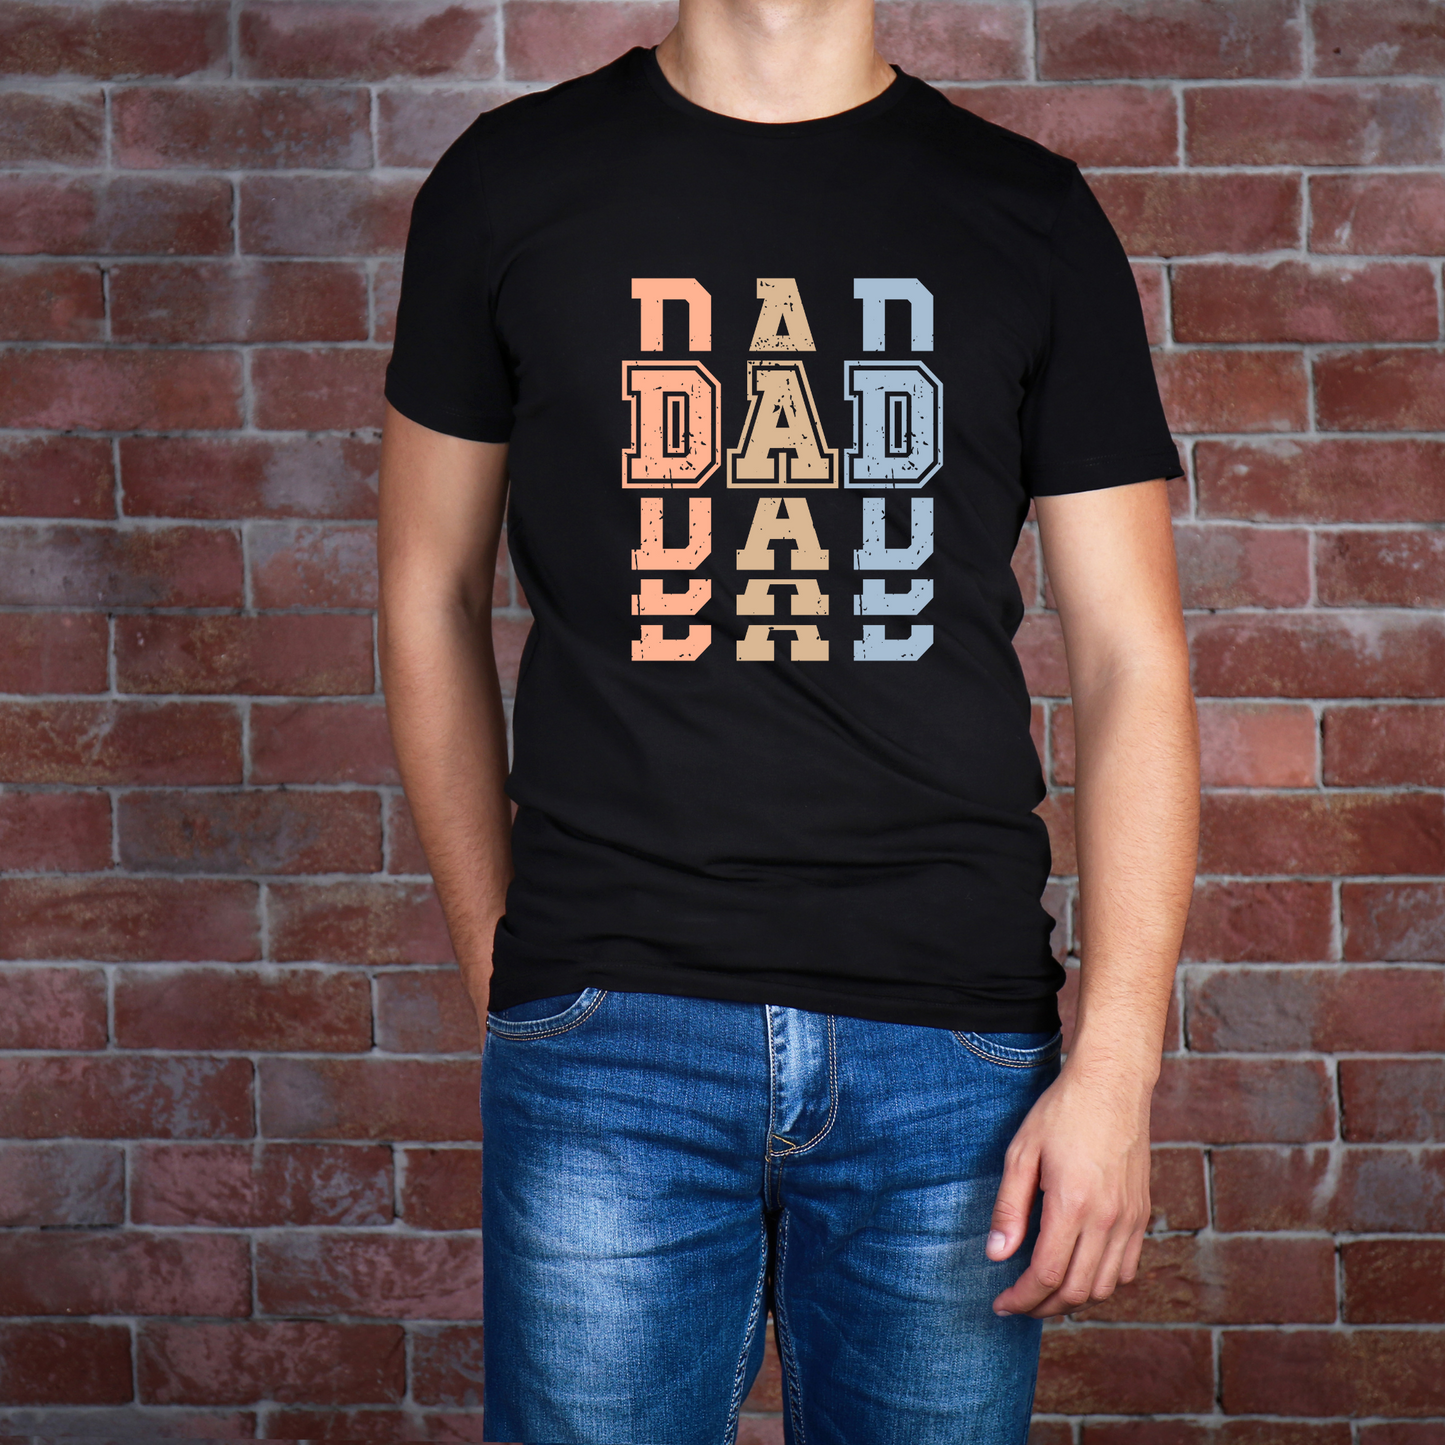 Dad Tee Shirt - Gift for Dad